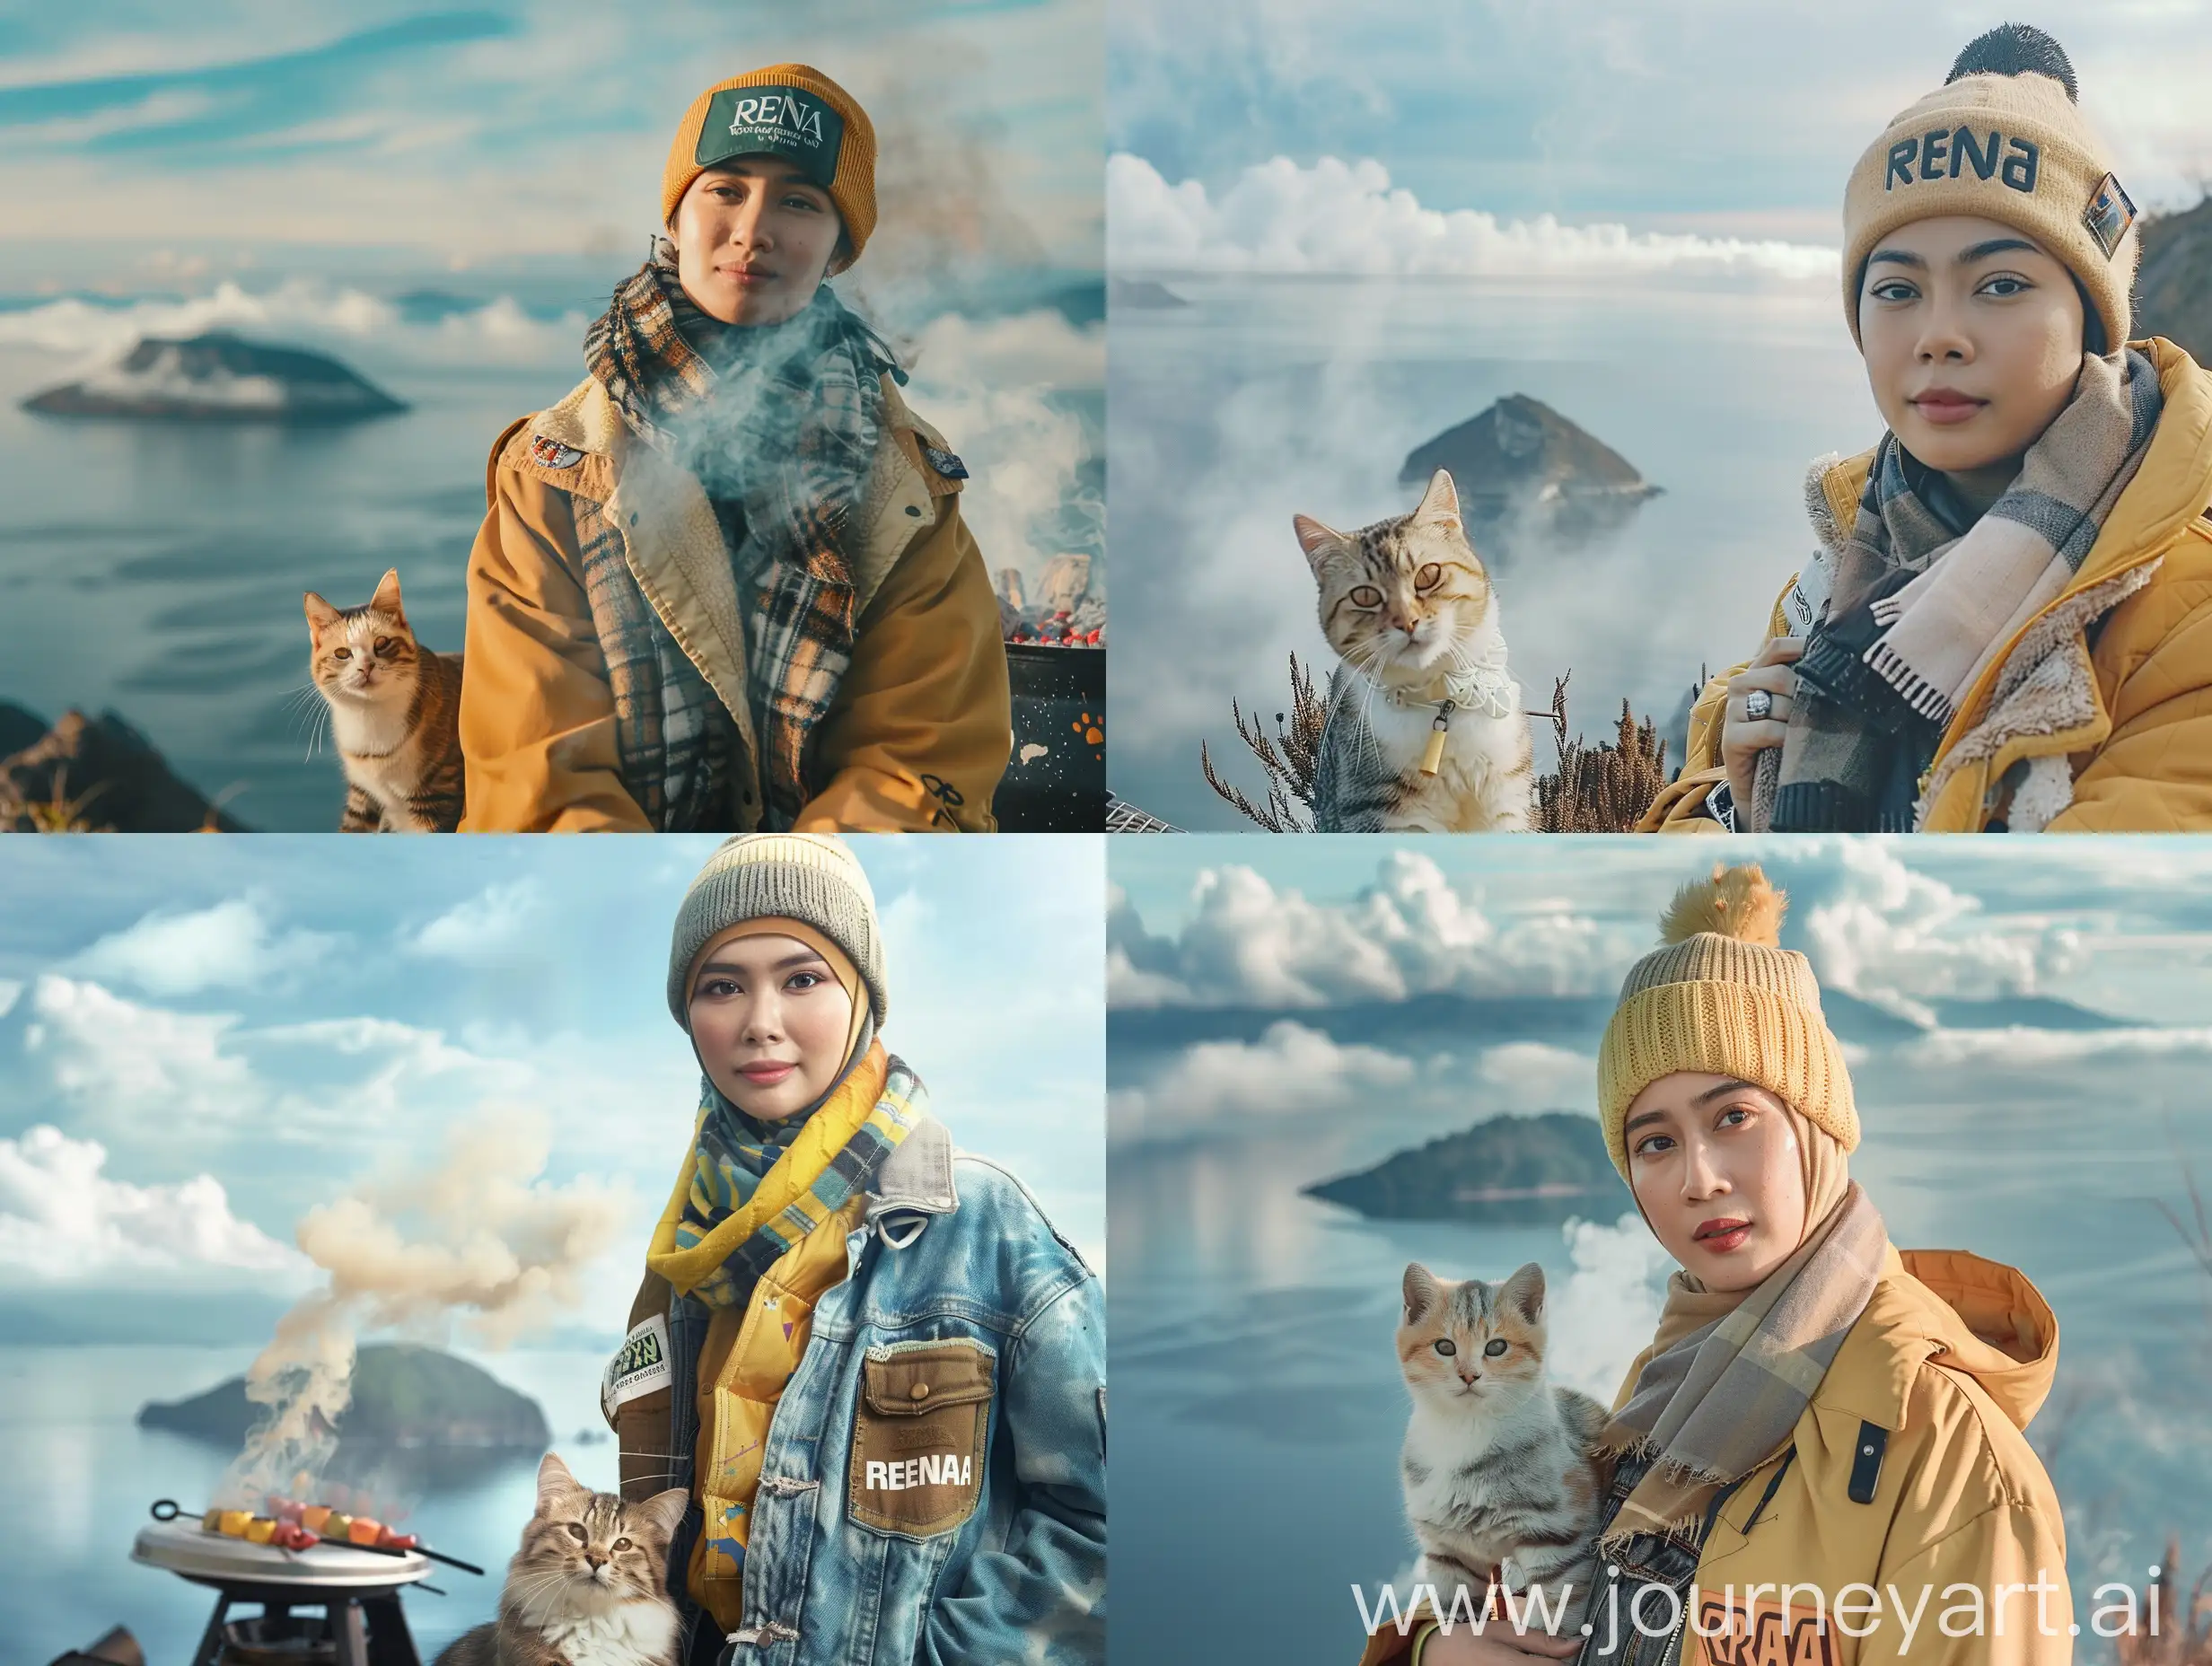 Indonesian-Woman-Grilling-Skewers-on-Mountain-Top-with-Cat-and-Scenic-Sea-View